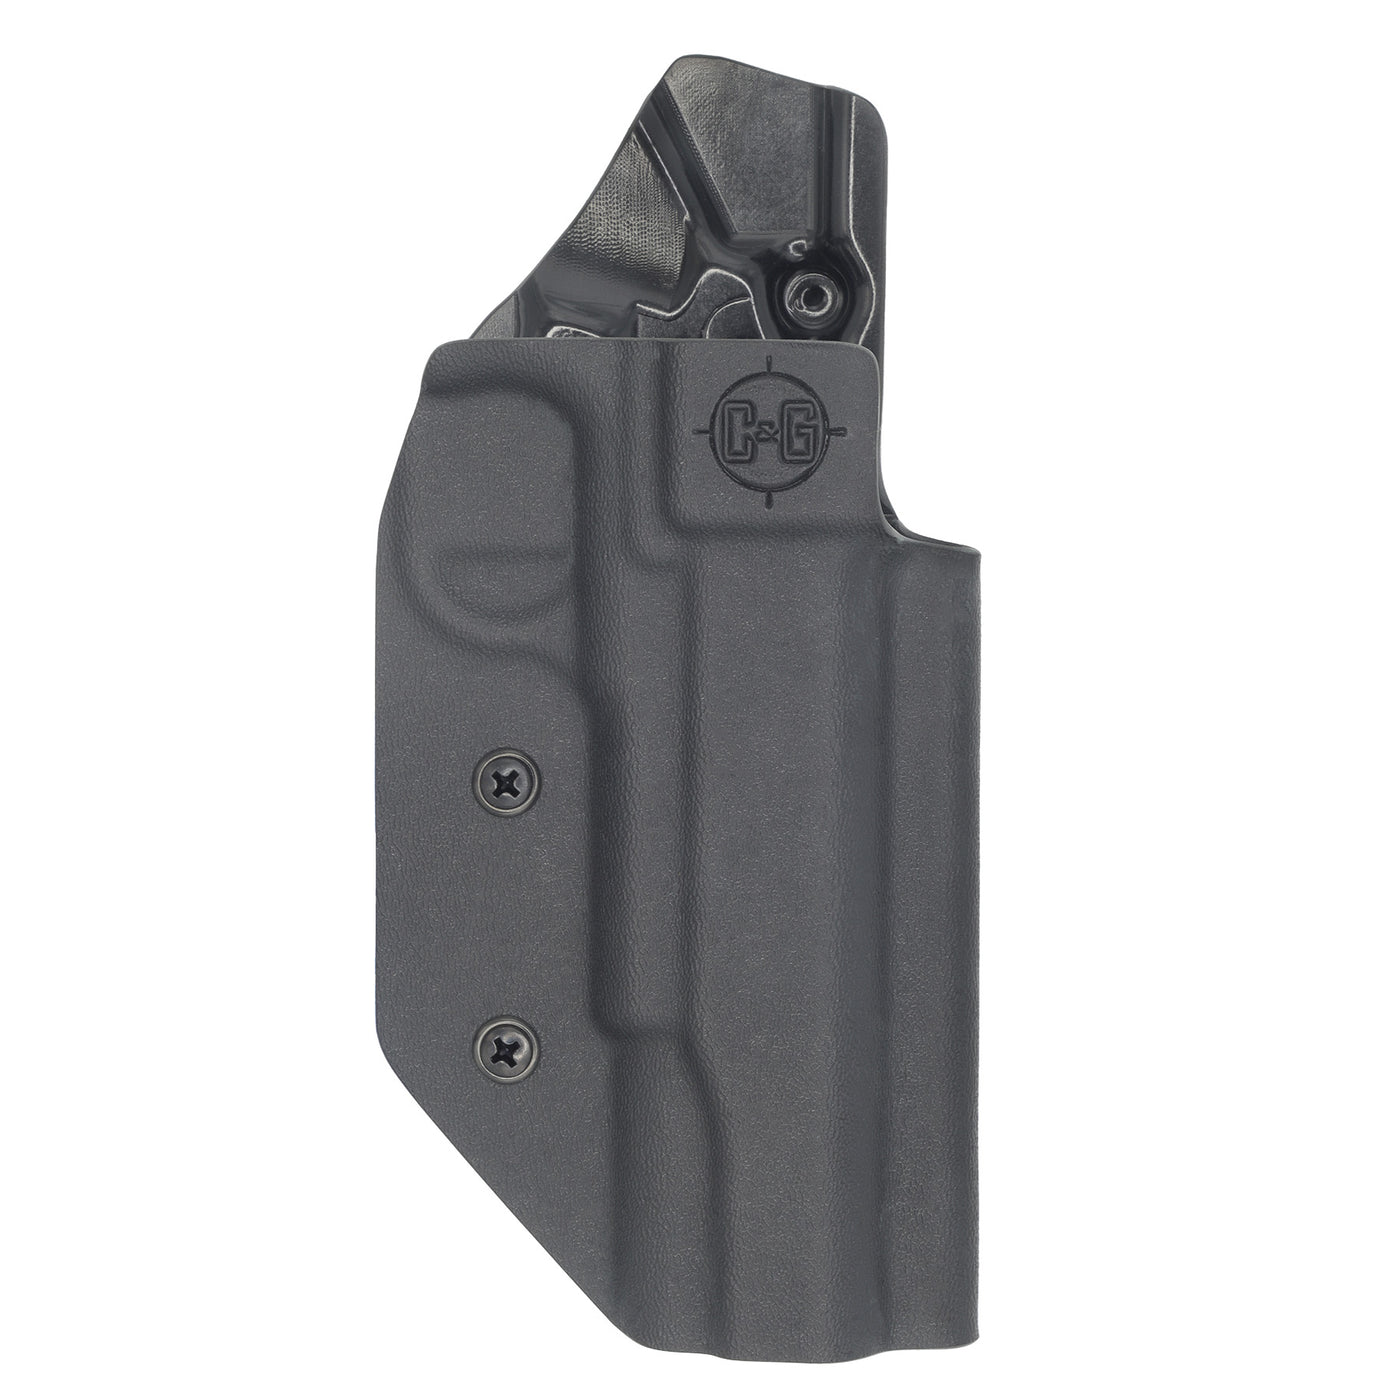 C&G Holsters Competition Starter Kit that is IDPA, USPSA & 3-GUN legal for 1911